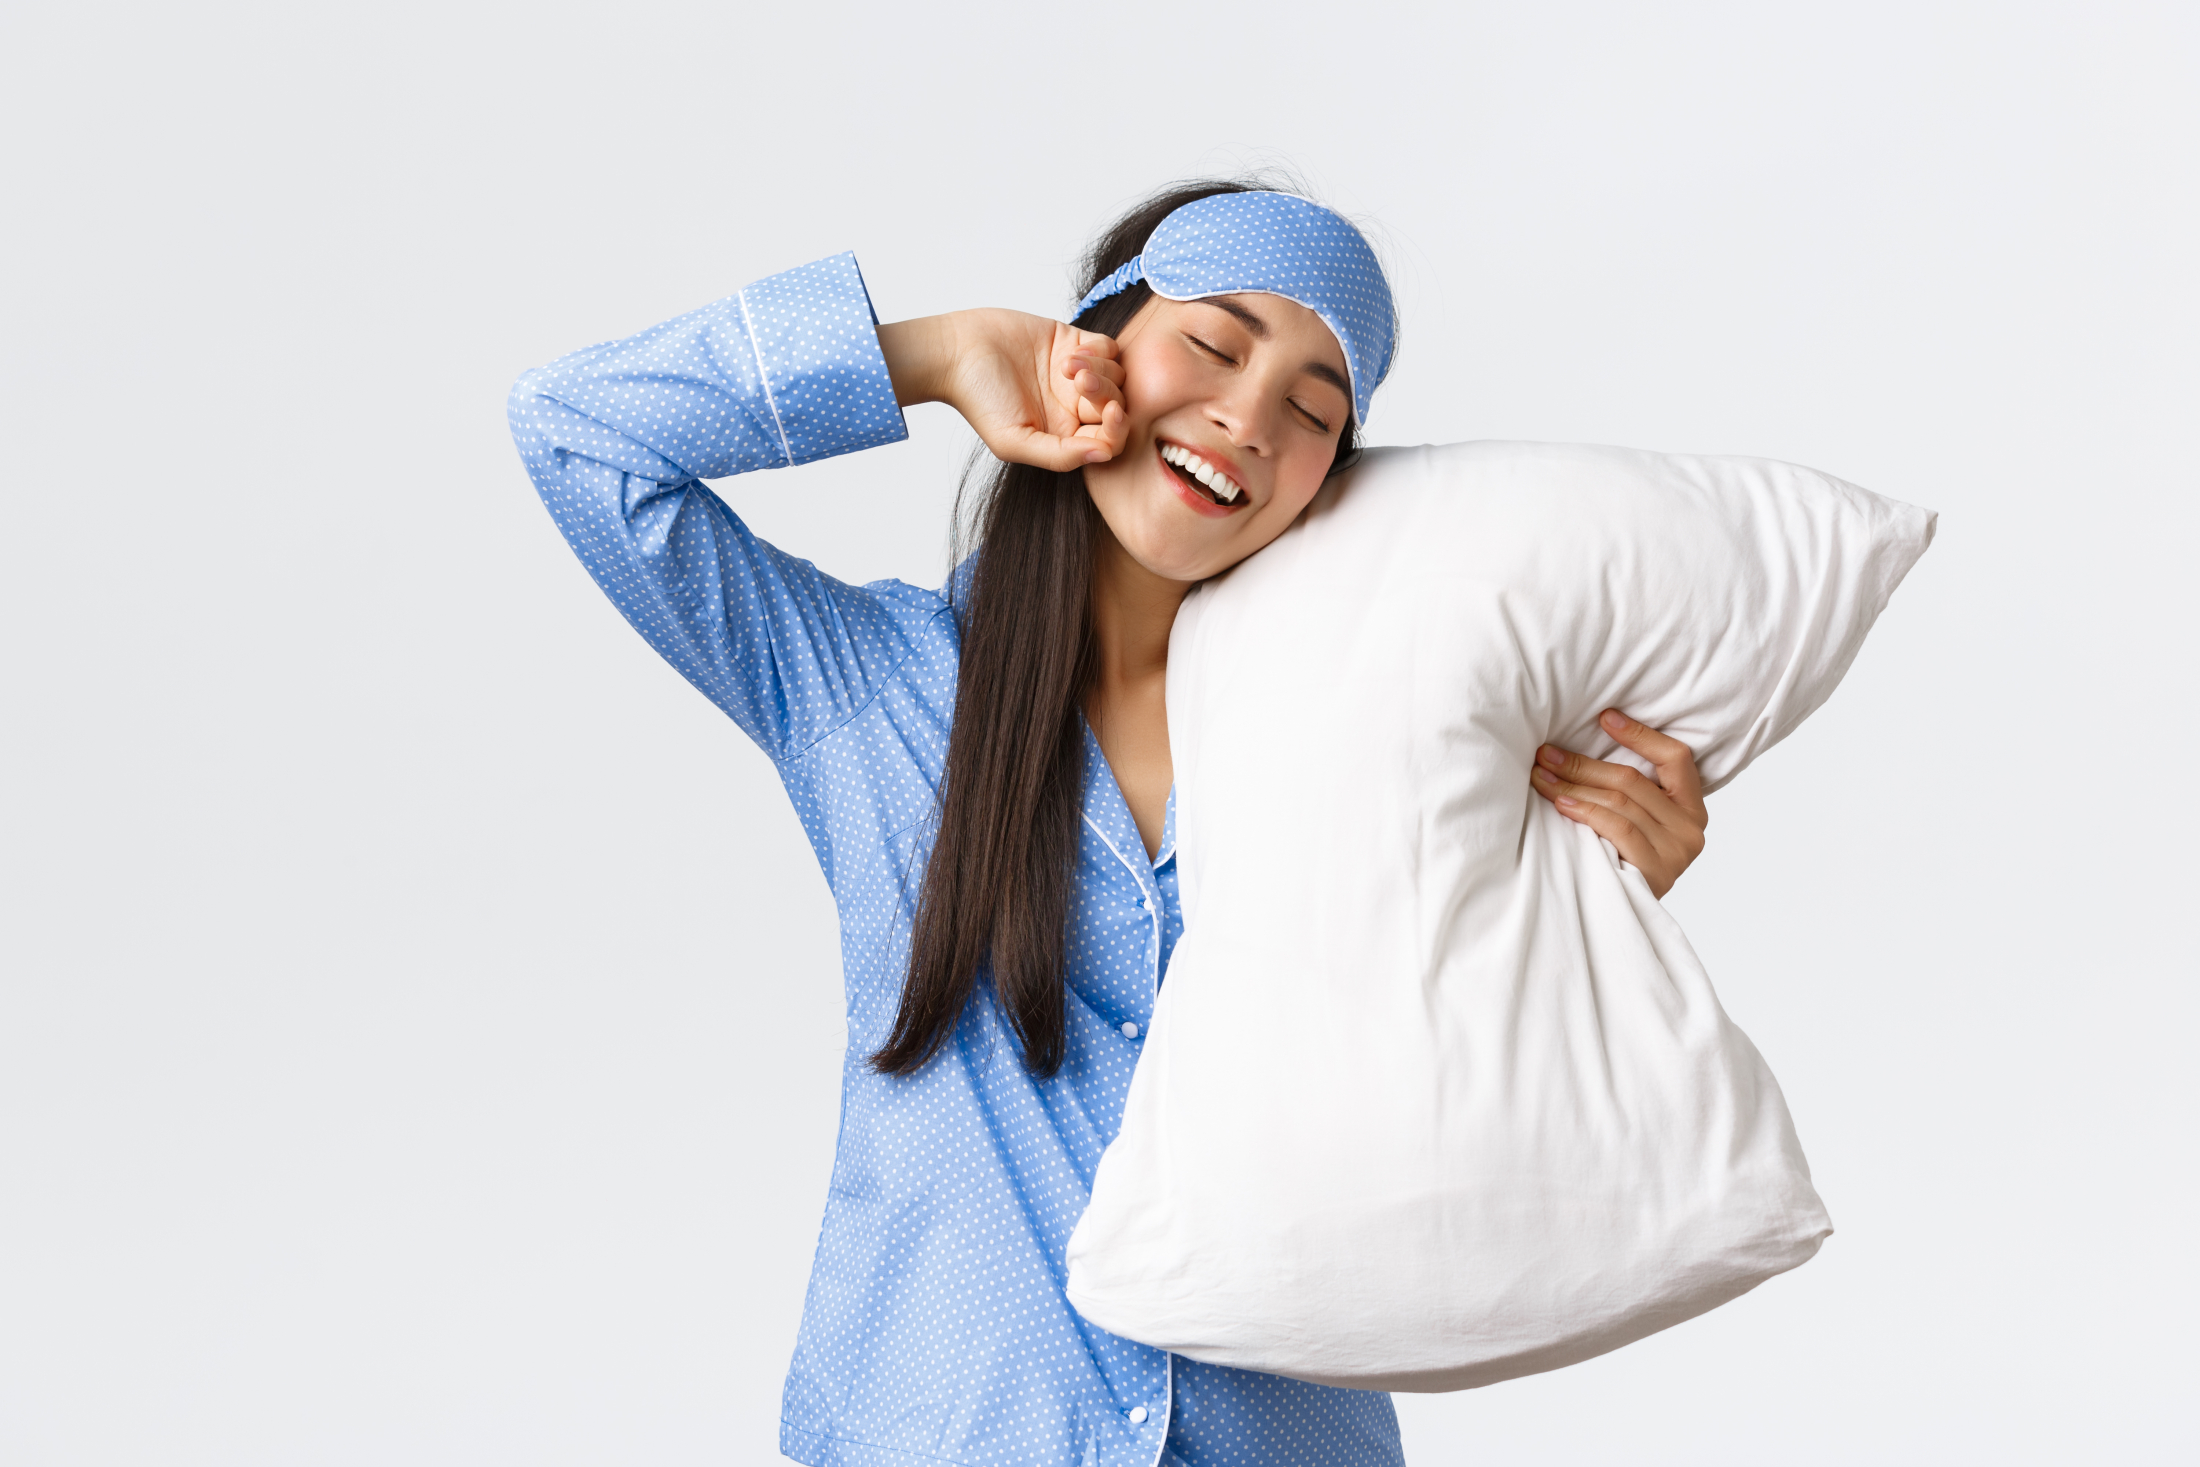 smiling-pleased-cute-asian-girl-in-blue-pyjama-and-sleeping-mask-hugging-pillow-and-stretching-hands-delighted-as-finally-going-bed-want-sleep-or-waking-up-in-morning-white-background.jpg